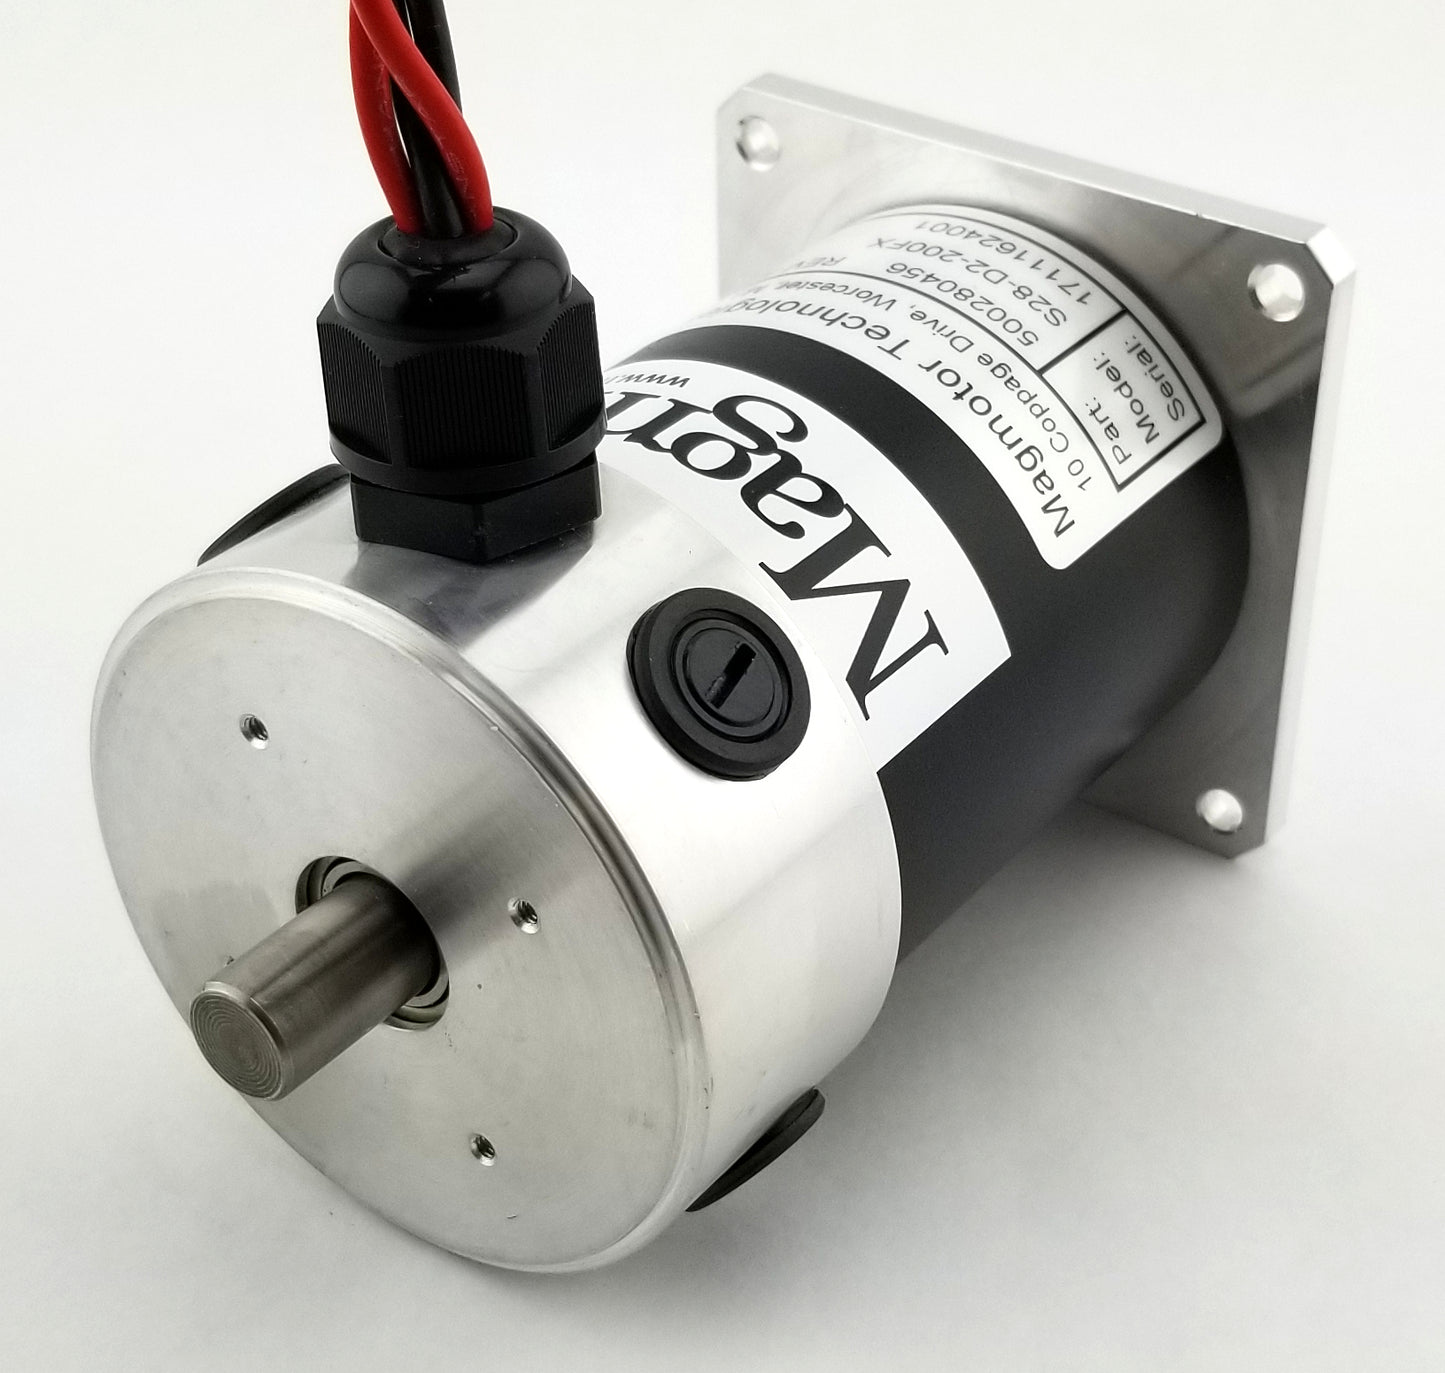 Magmotor S28-D2-200FX 12 to 24 Volt 4 Pole Brushed Motor 500280456 Rear View